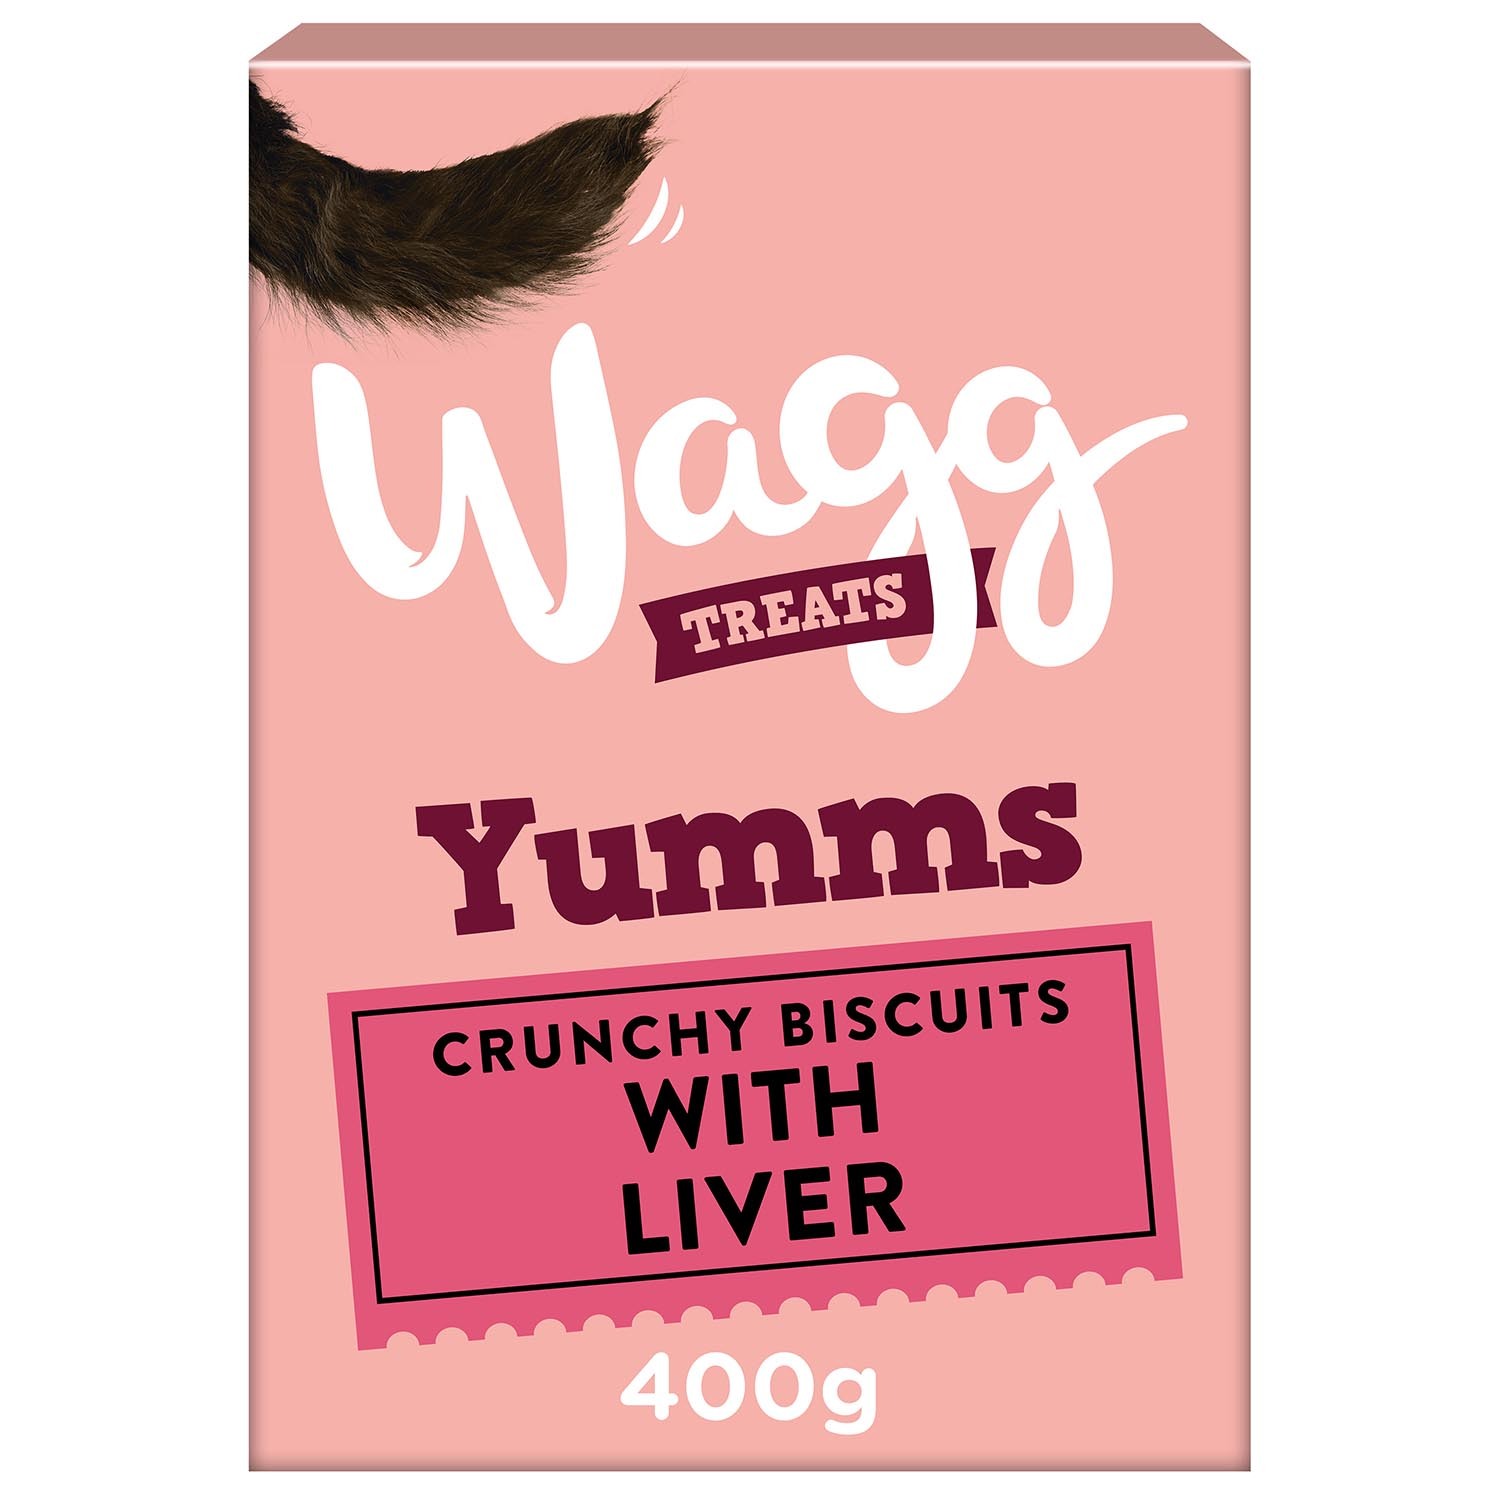 Wagg Yumms Crunchy Biscuits with Liver Dog Treat 400g Image